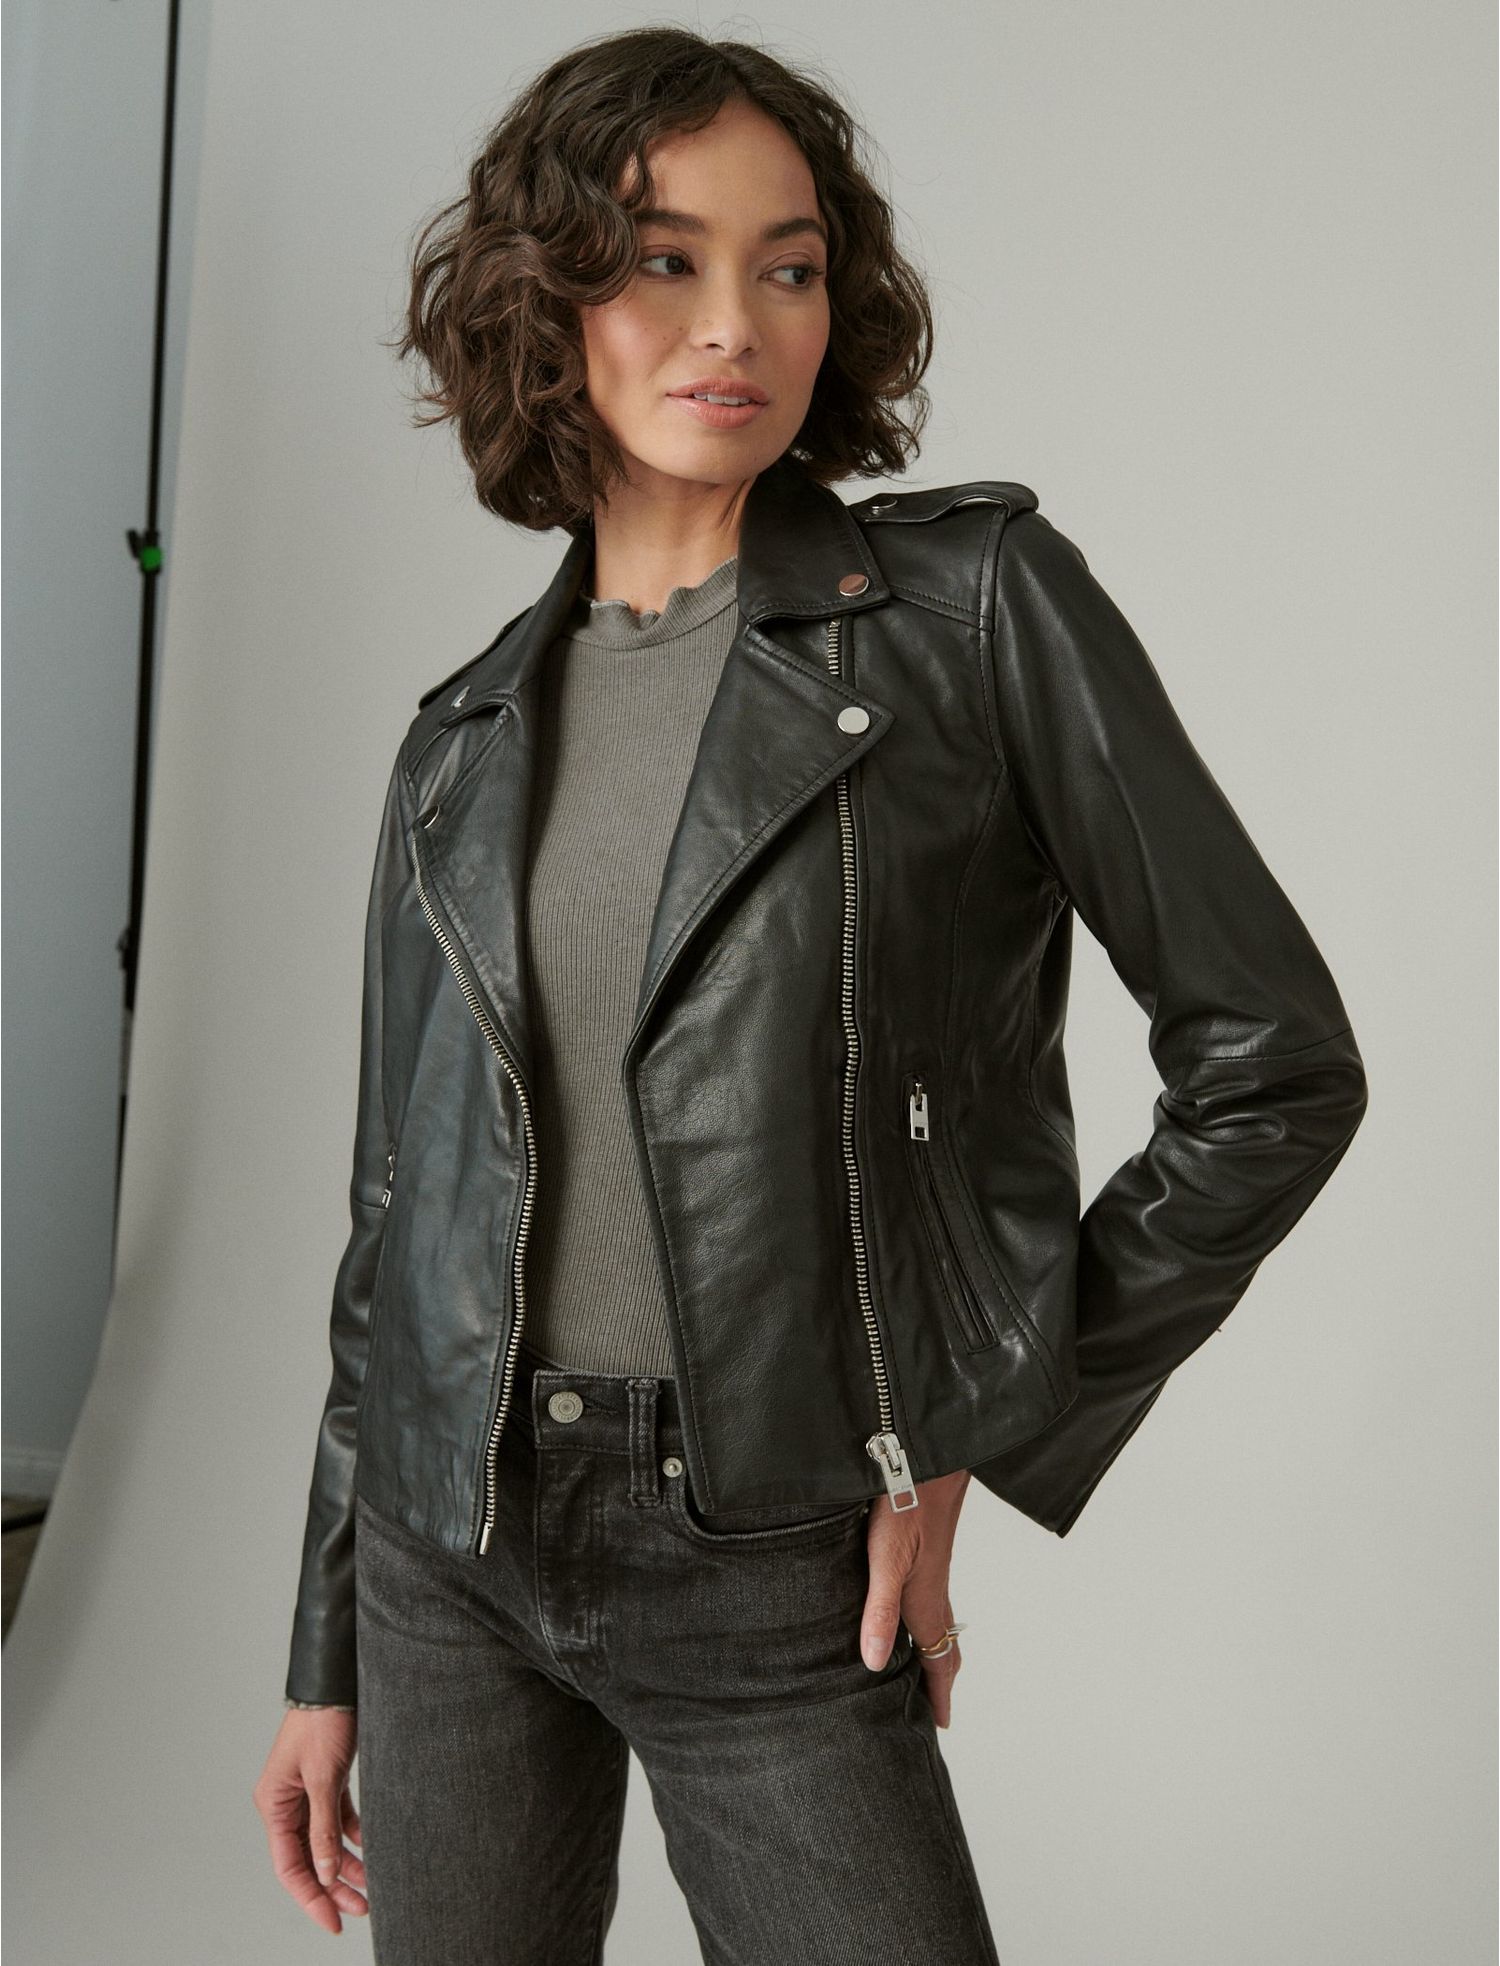 7. Lucky Brand Classic Leather Moto Jacket